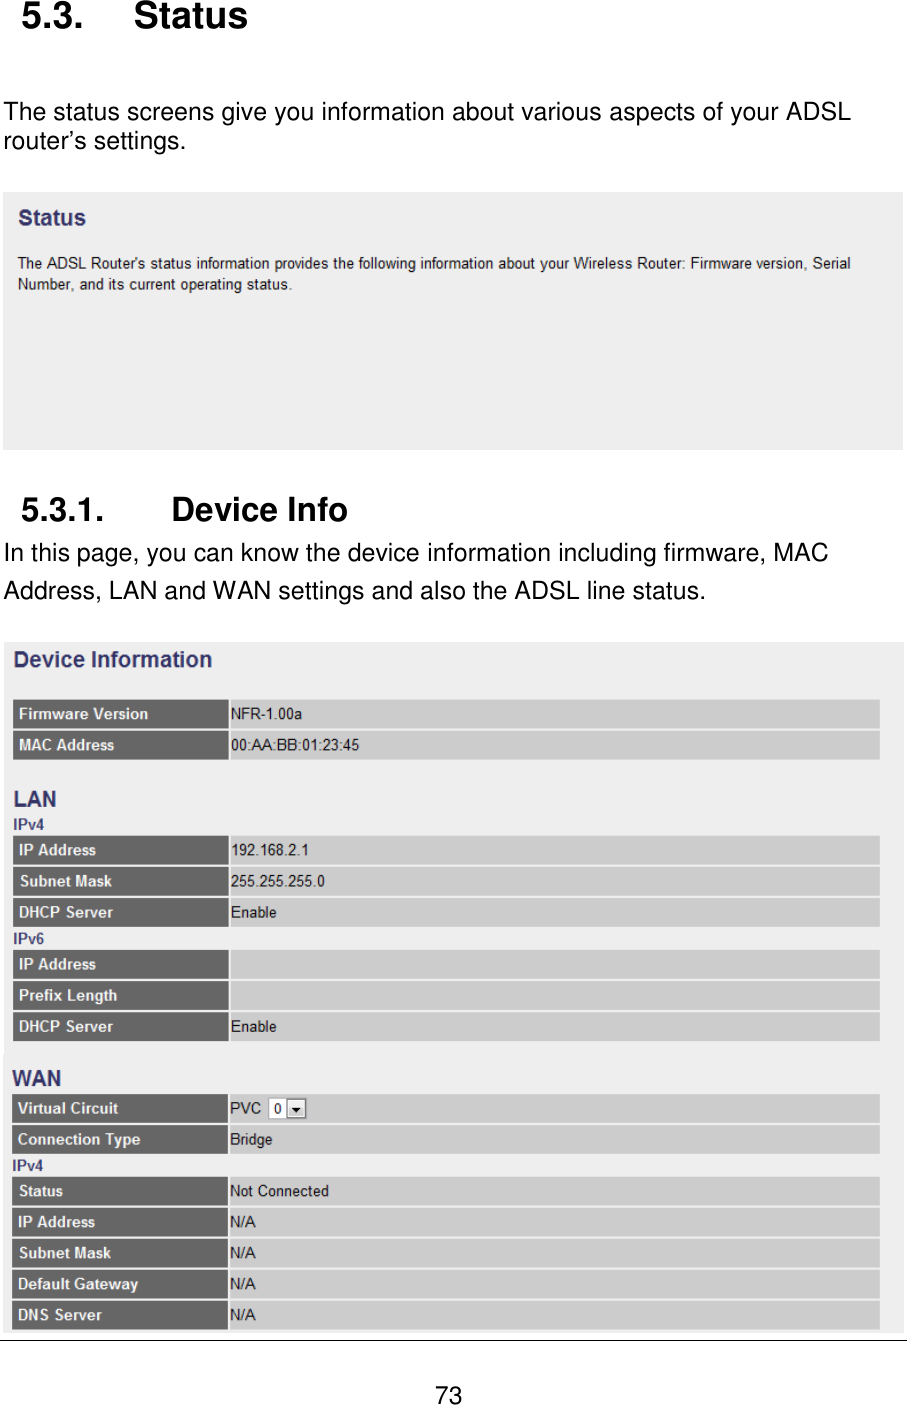   73 5.3.  Status  The status screens give you information about various aspects of your ADSL router’s settings.    5.3.1.  Device Info In this page, you can know the device information including firmware, MAC Address, LAN and WAN settings and also the ADSL line status.    